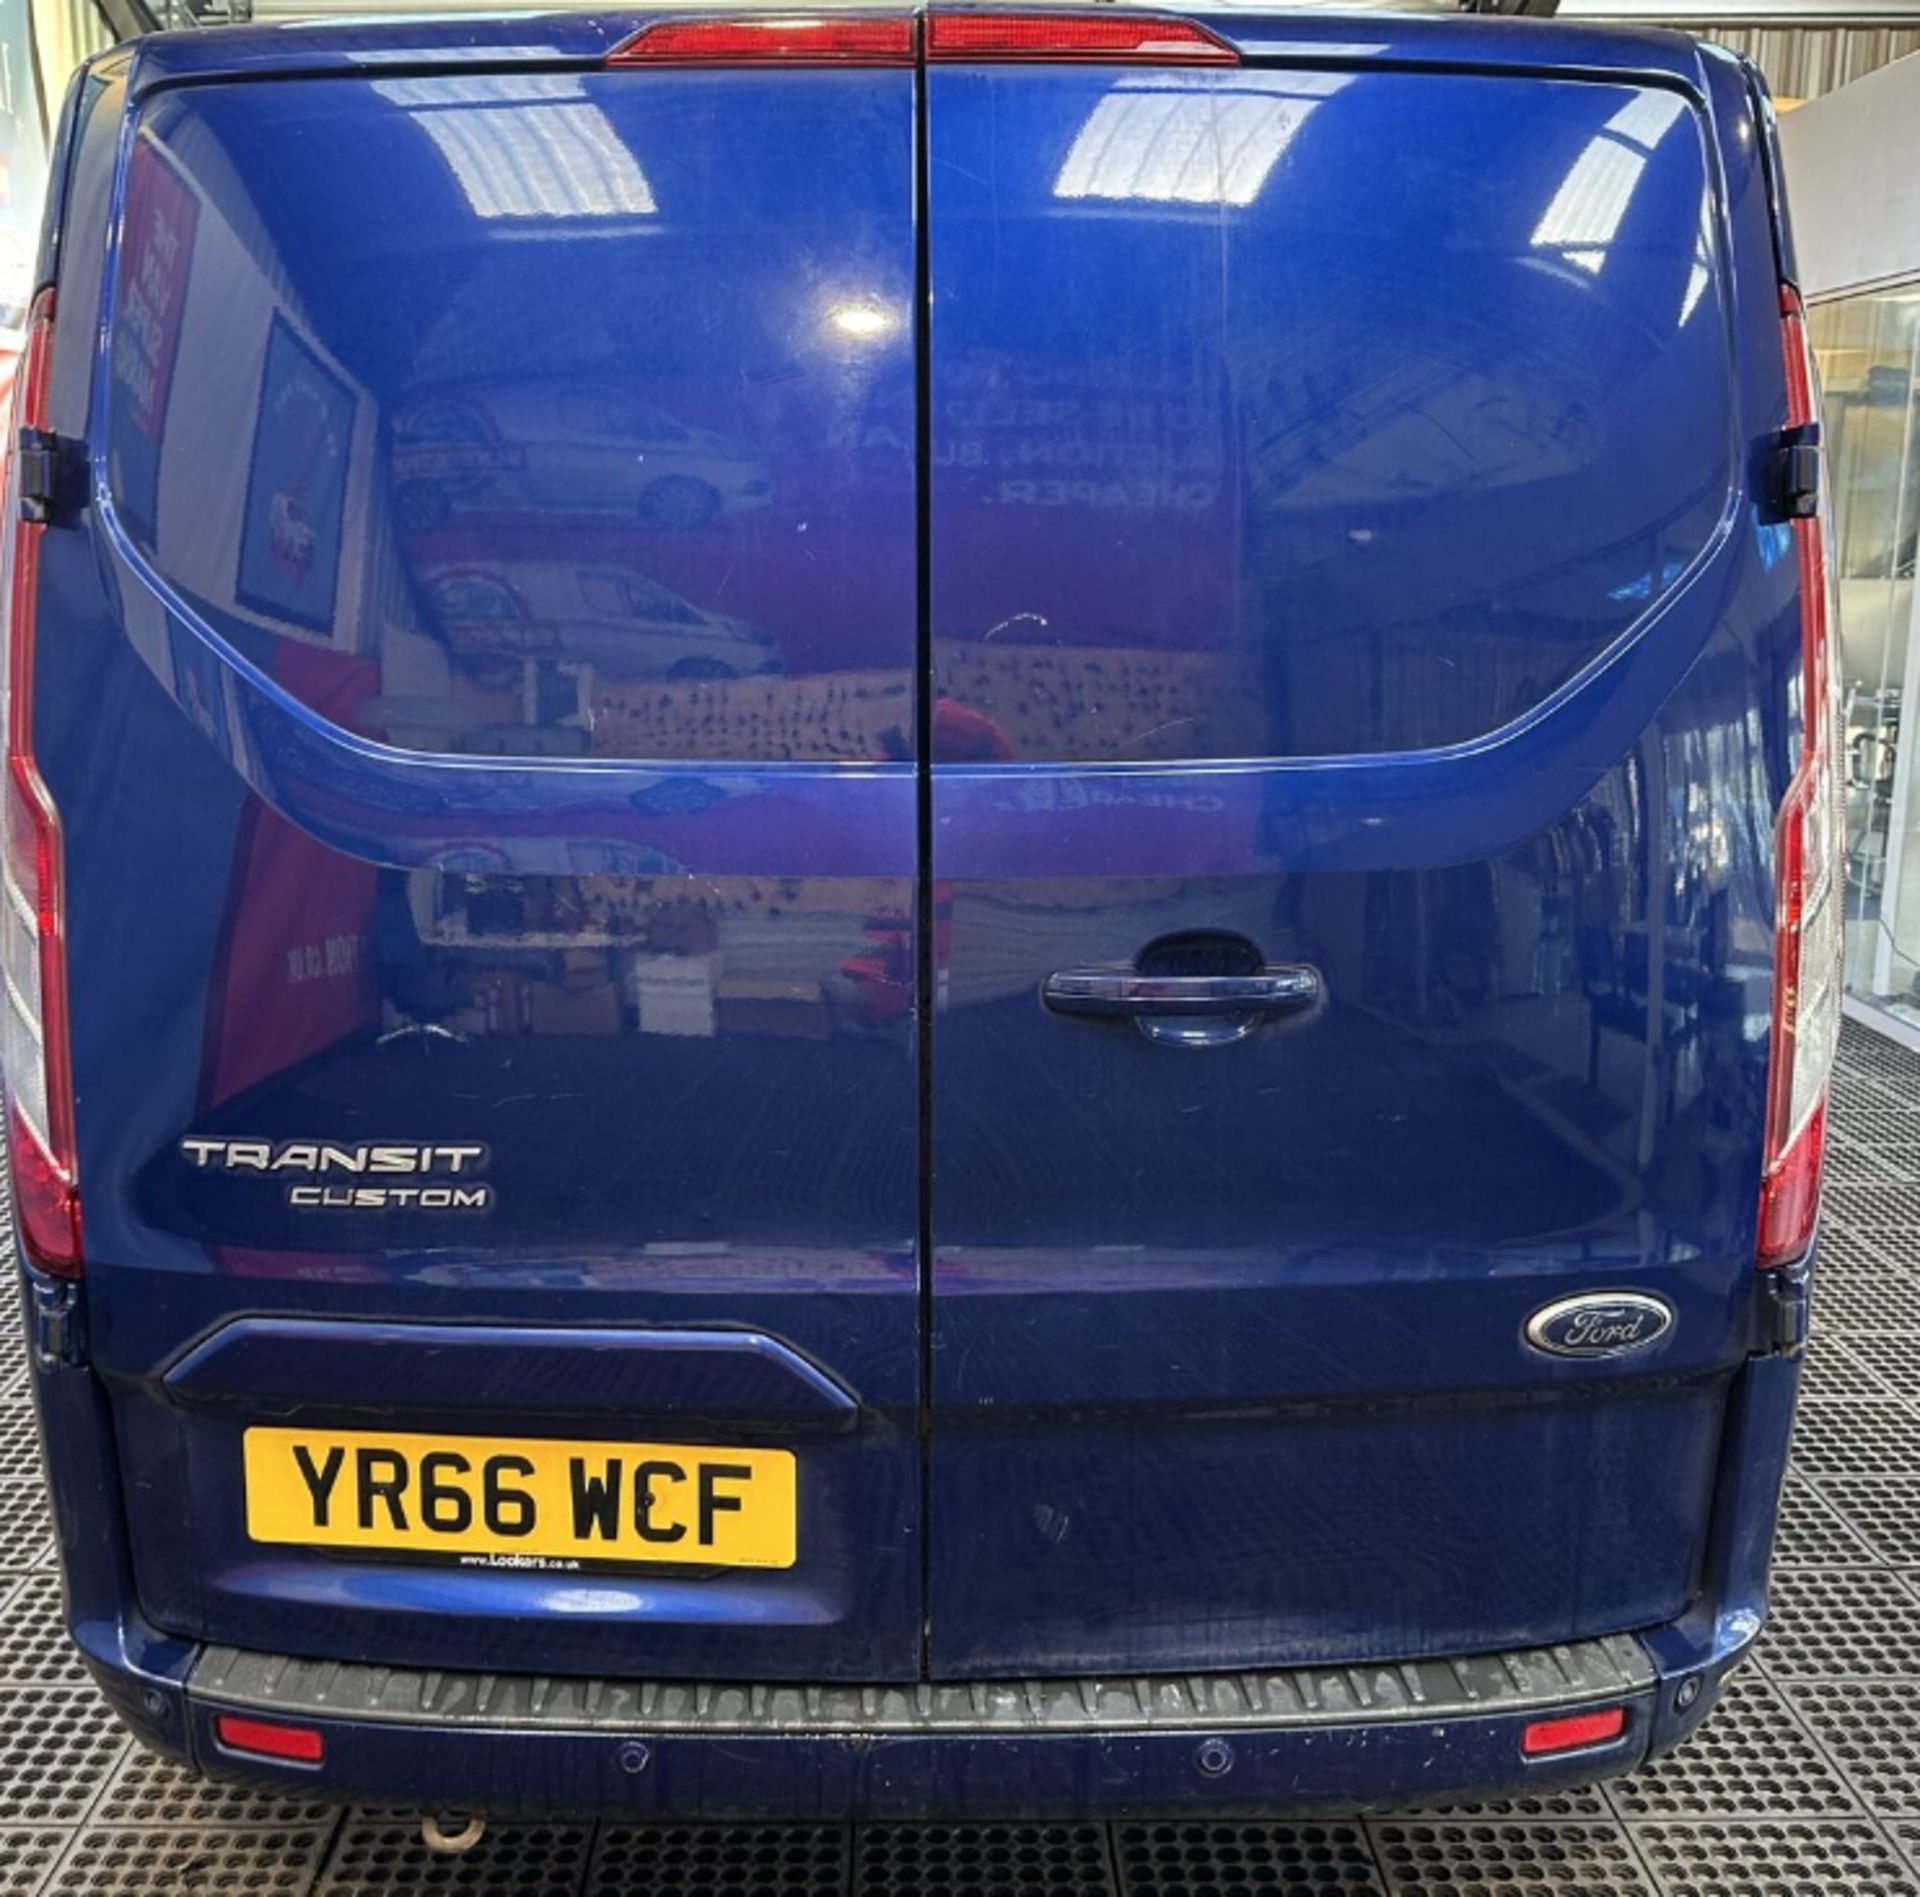 POWER PACKED PRESENCE: 66 PLATE FORD TRANSIT CUSTOM 290 L2 DIESEL, 130PS - Image 4 of 10